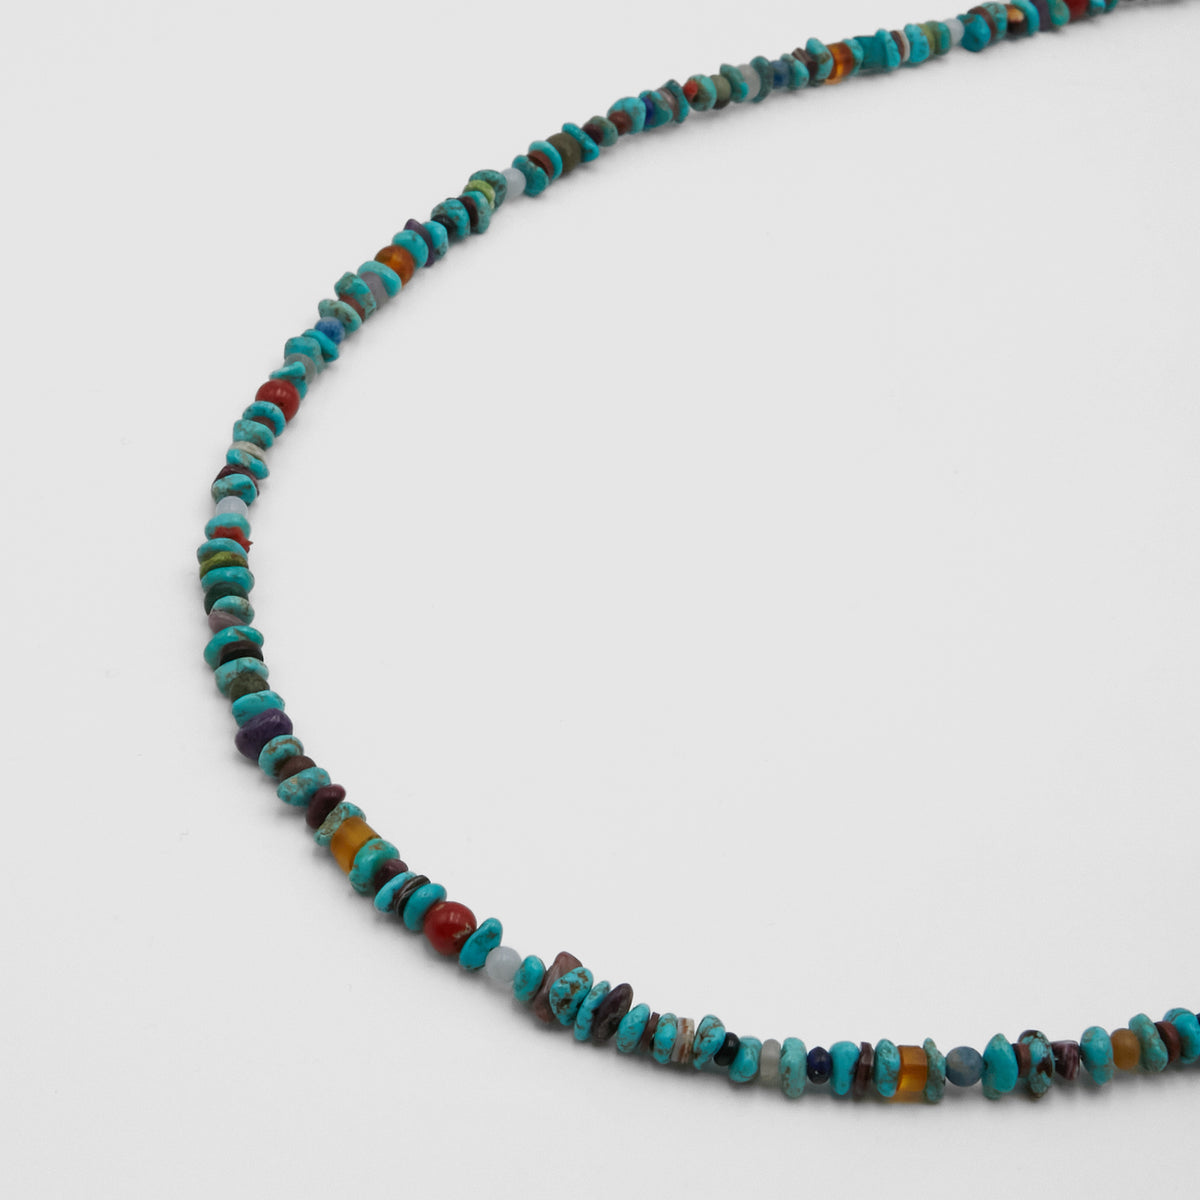 Vintage Jewelry Mixed Turquoise Necklace